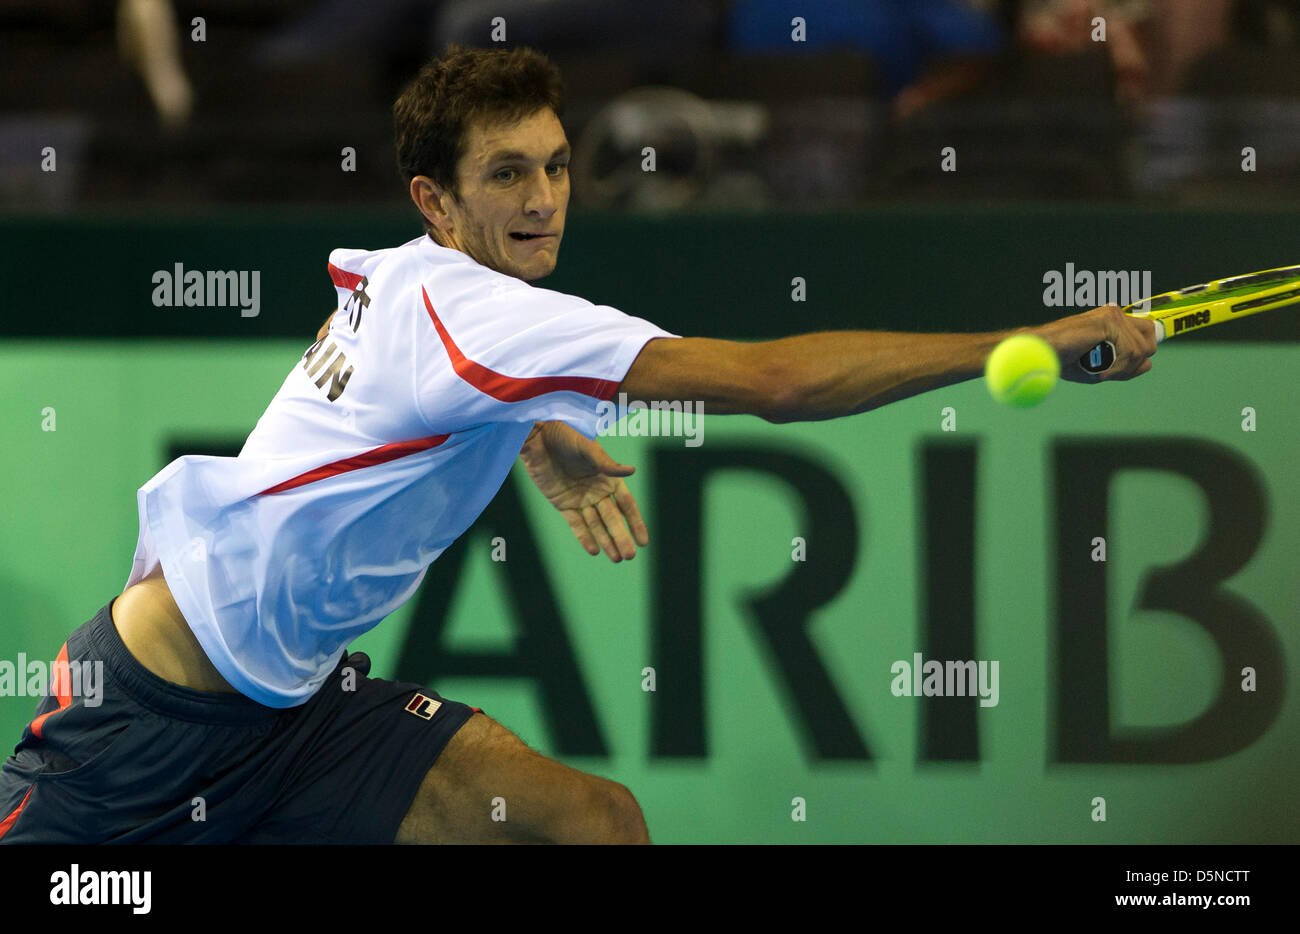 Coventry, UK. 5th April 2013.  Great Britain's James Ward playing against Russia's Evgeny Donskoy during the Euro/Africa Zone Group I Davis Cup tie between Great Britain and Russia from the Ricoh Arena. Credit: Action Plus Sports Images / Alamy Live News Stock Photo